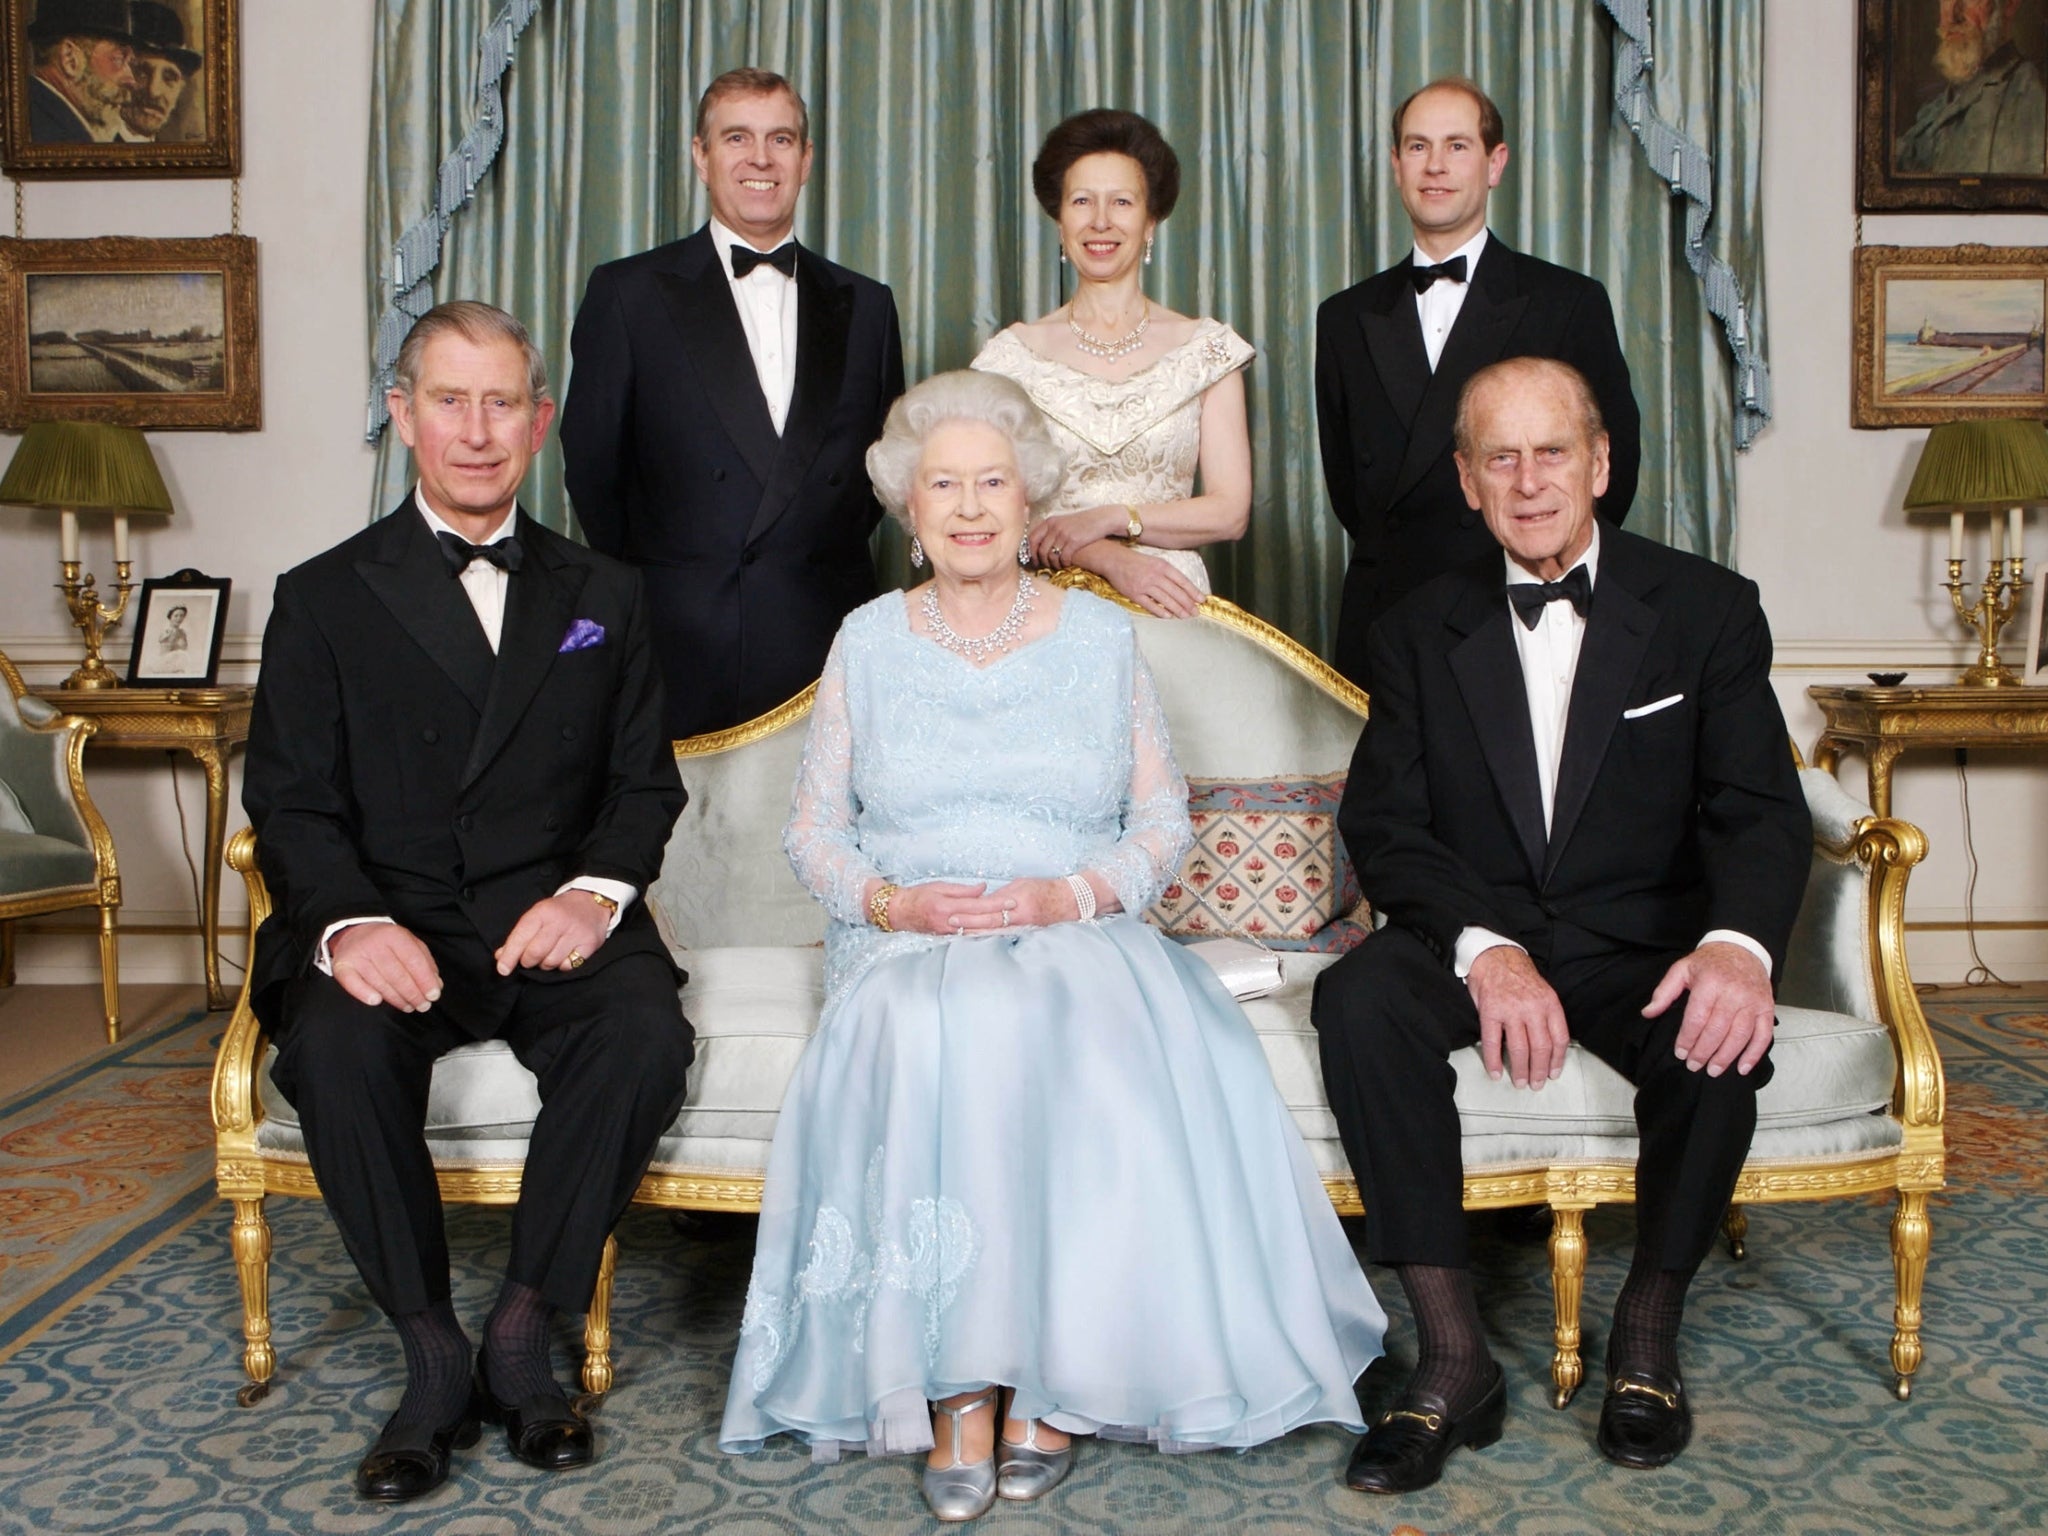 (L-R) Prince Charles, Prince Andrew, the Queen, Princess Anne, Prince Edward and Prince Philip mark the diamond wedding anniversary of the Queen and Philip in November 2007